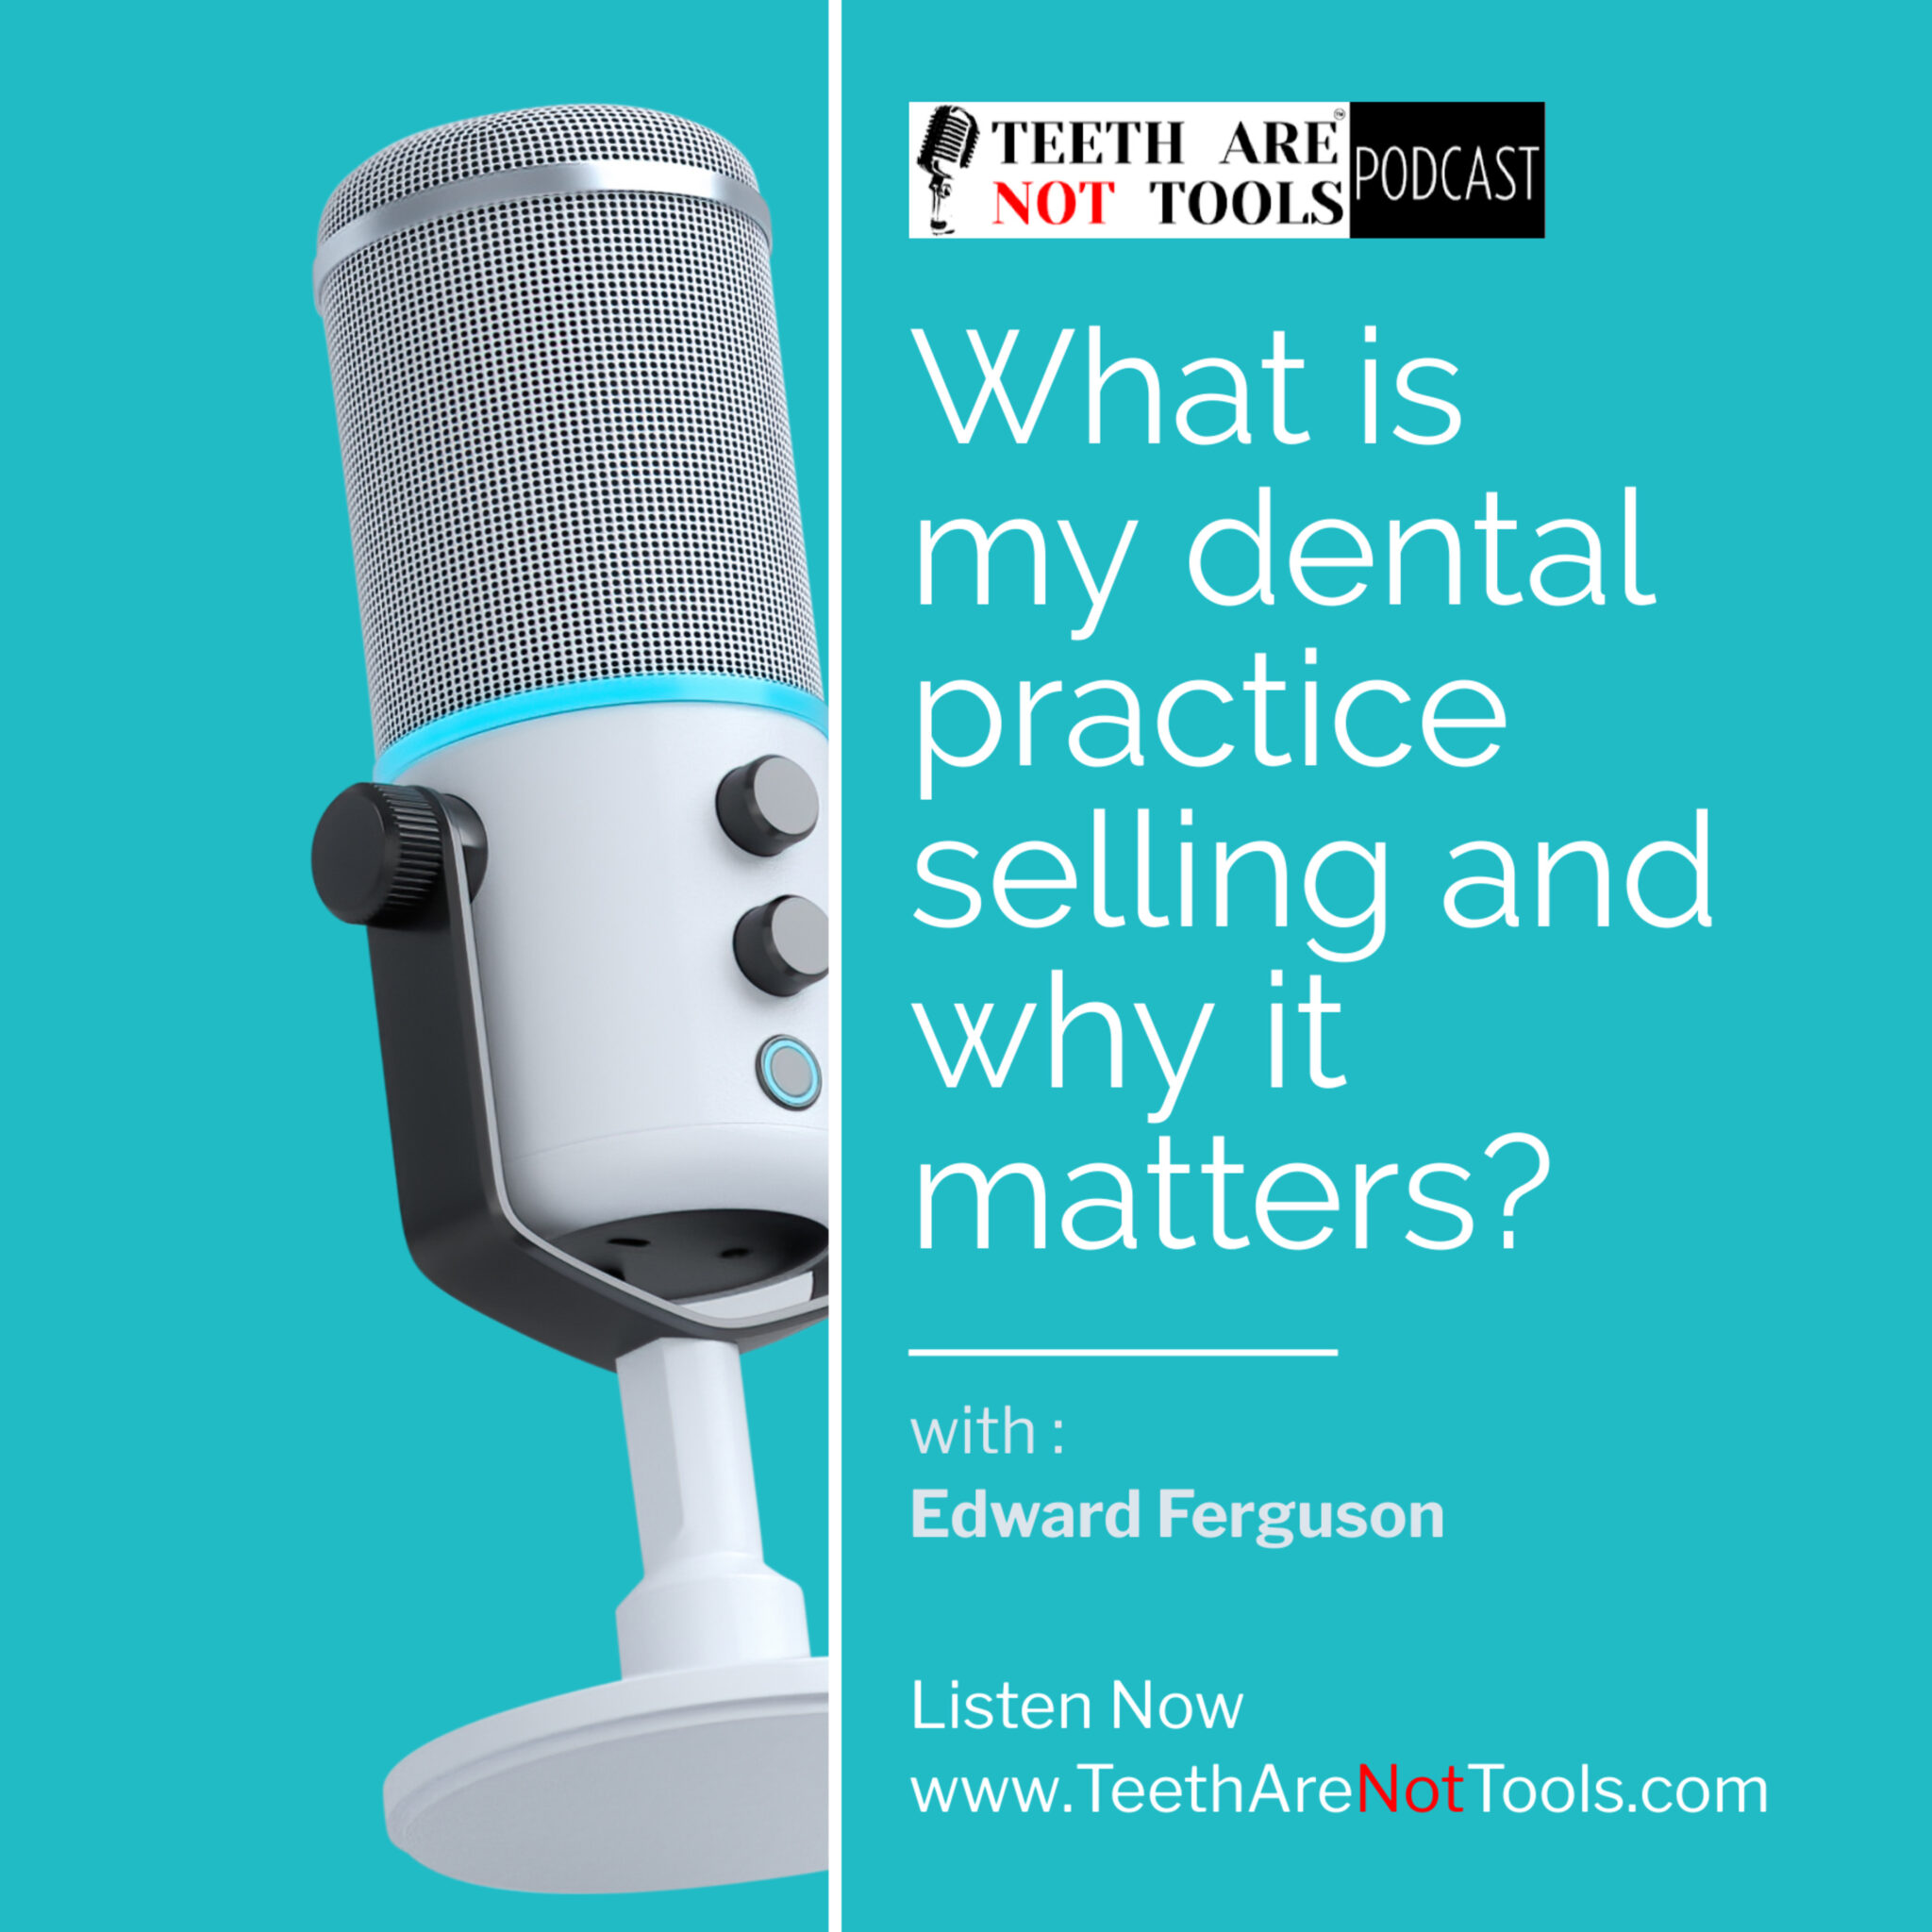 Podcast banner image of a microphone and text "What is my dental practice selling and why it matters"